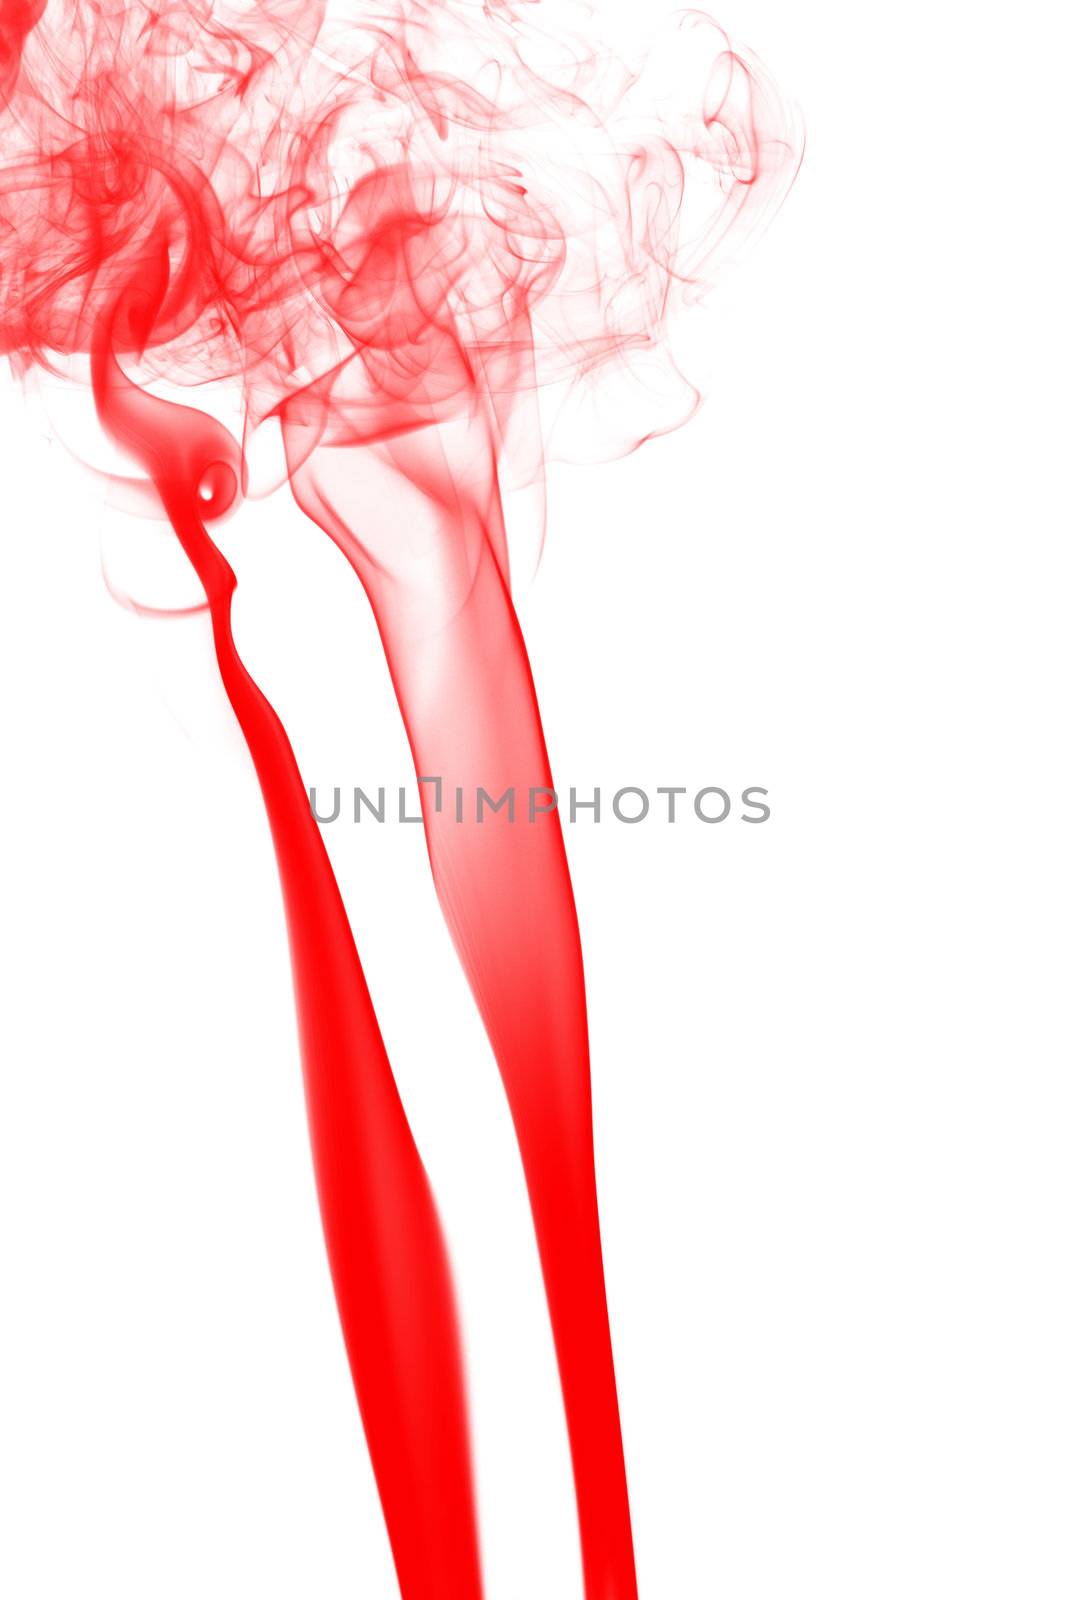 Red Smoke by mimocas29